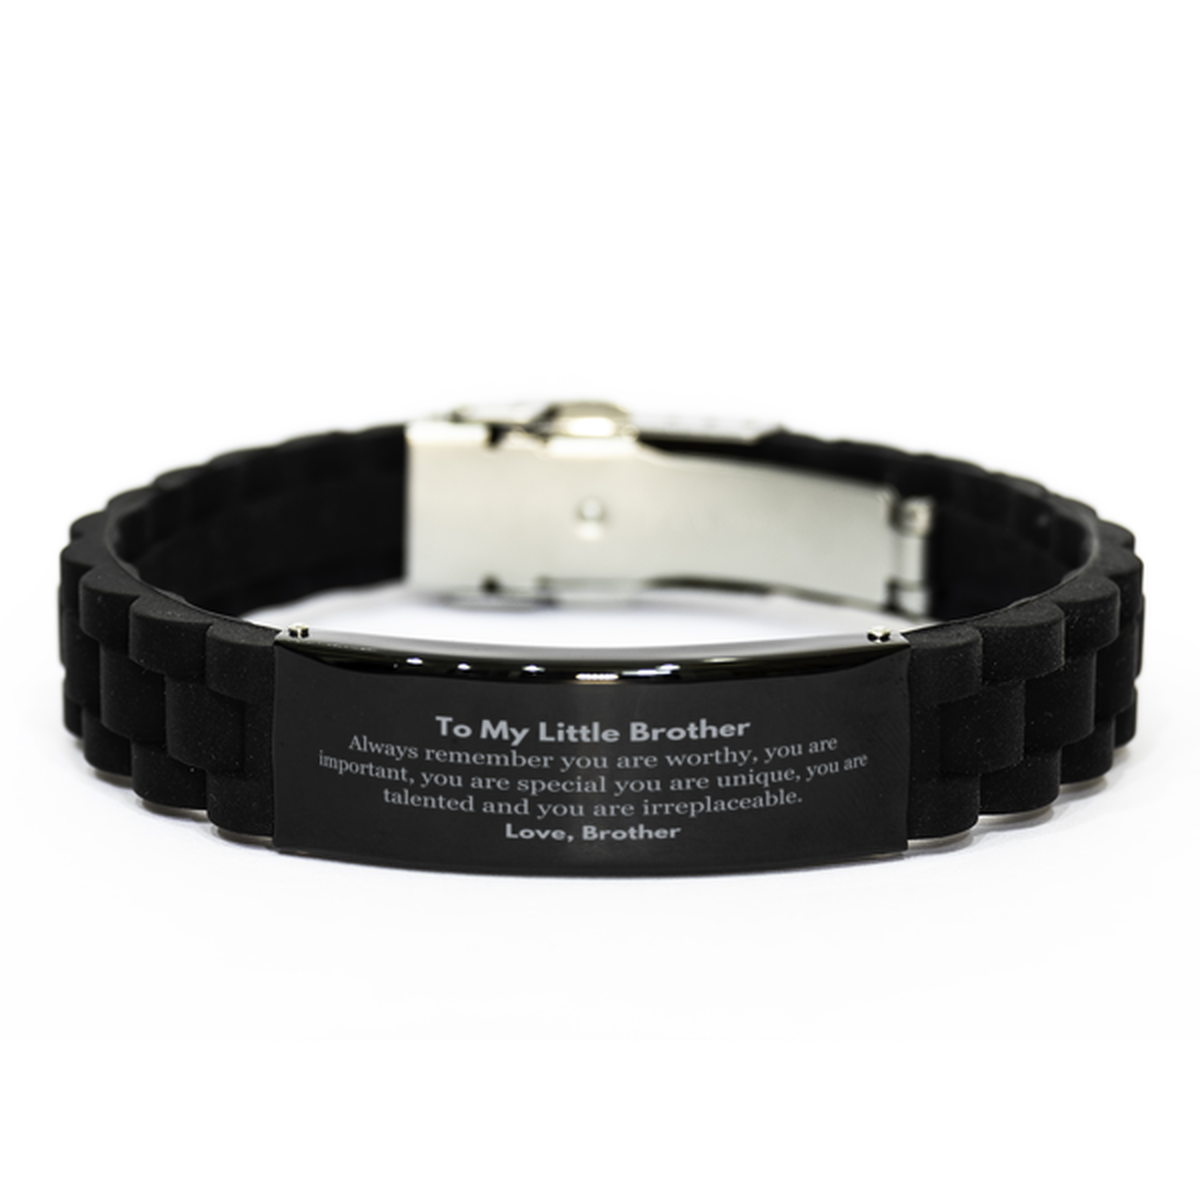 Little Brother Birthday Gifts from Brother, Inspirational Black Glidelock Clasp Bracelet for Little Brother Christmas Graduation Gifts for Little Brother Always remember you are worthy, you are important. Love, Brother